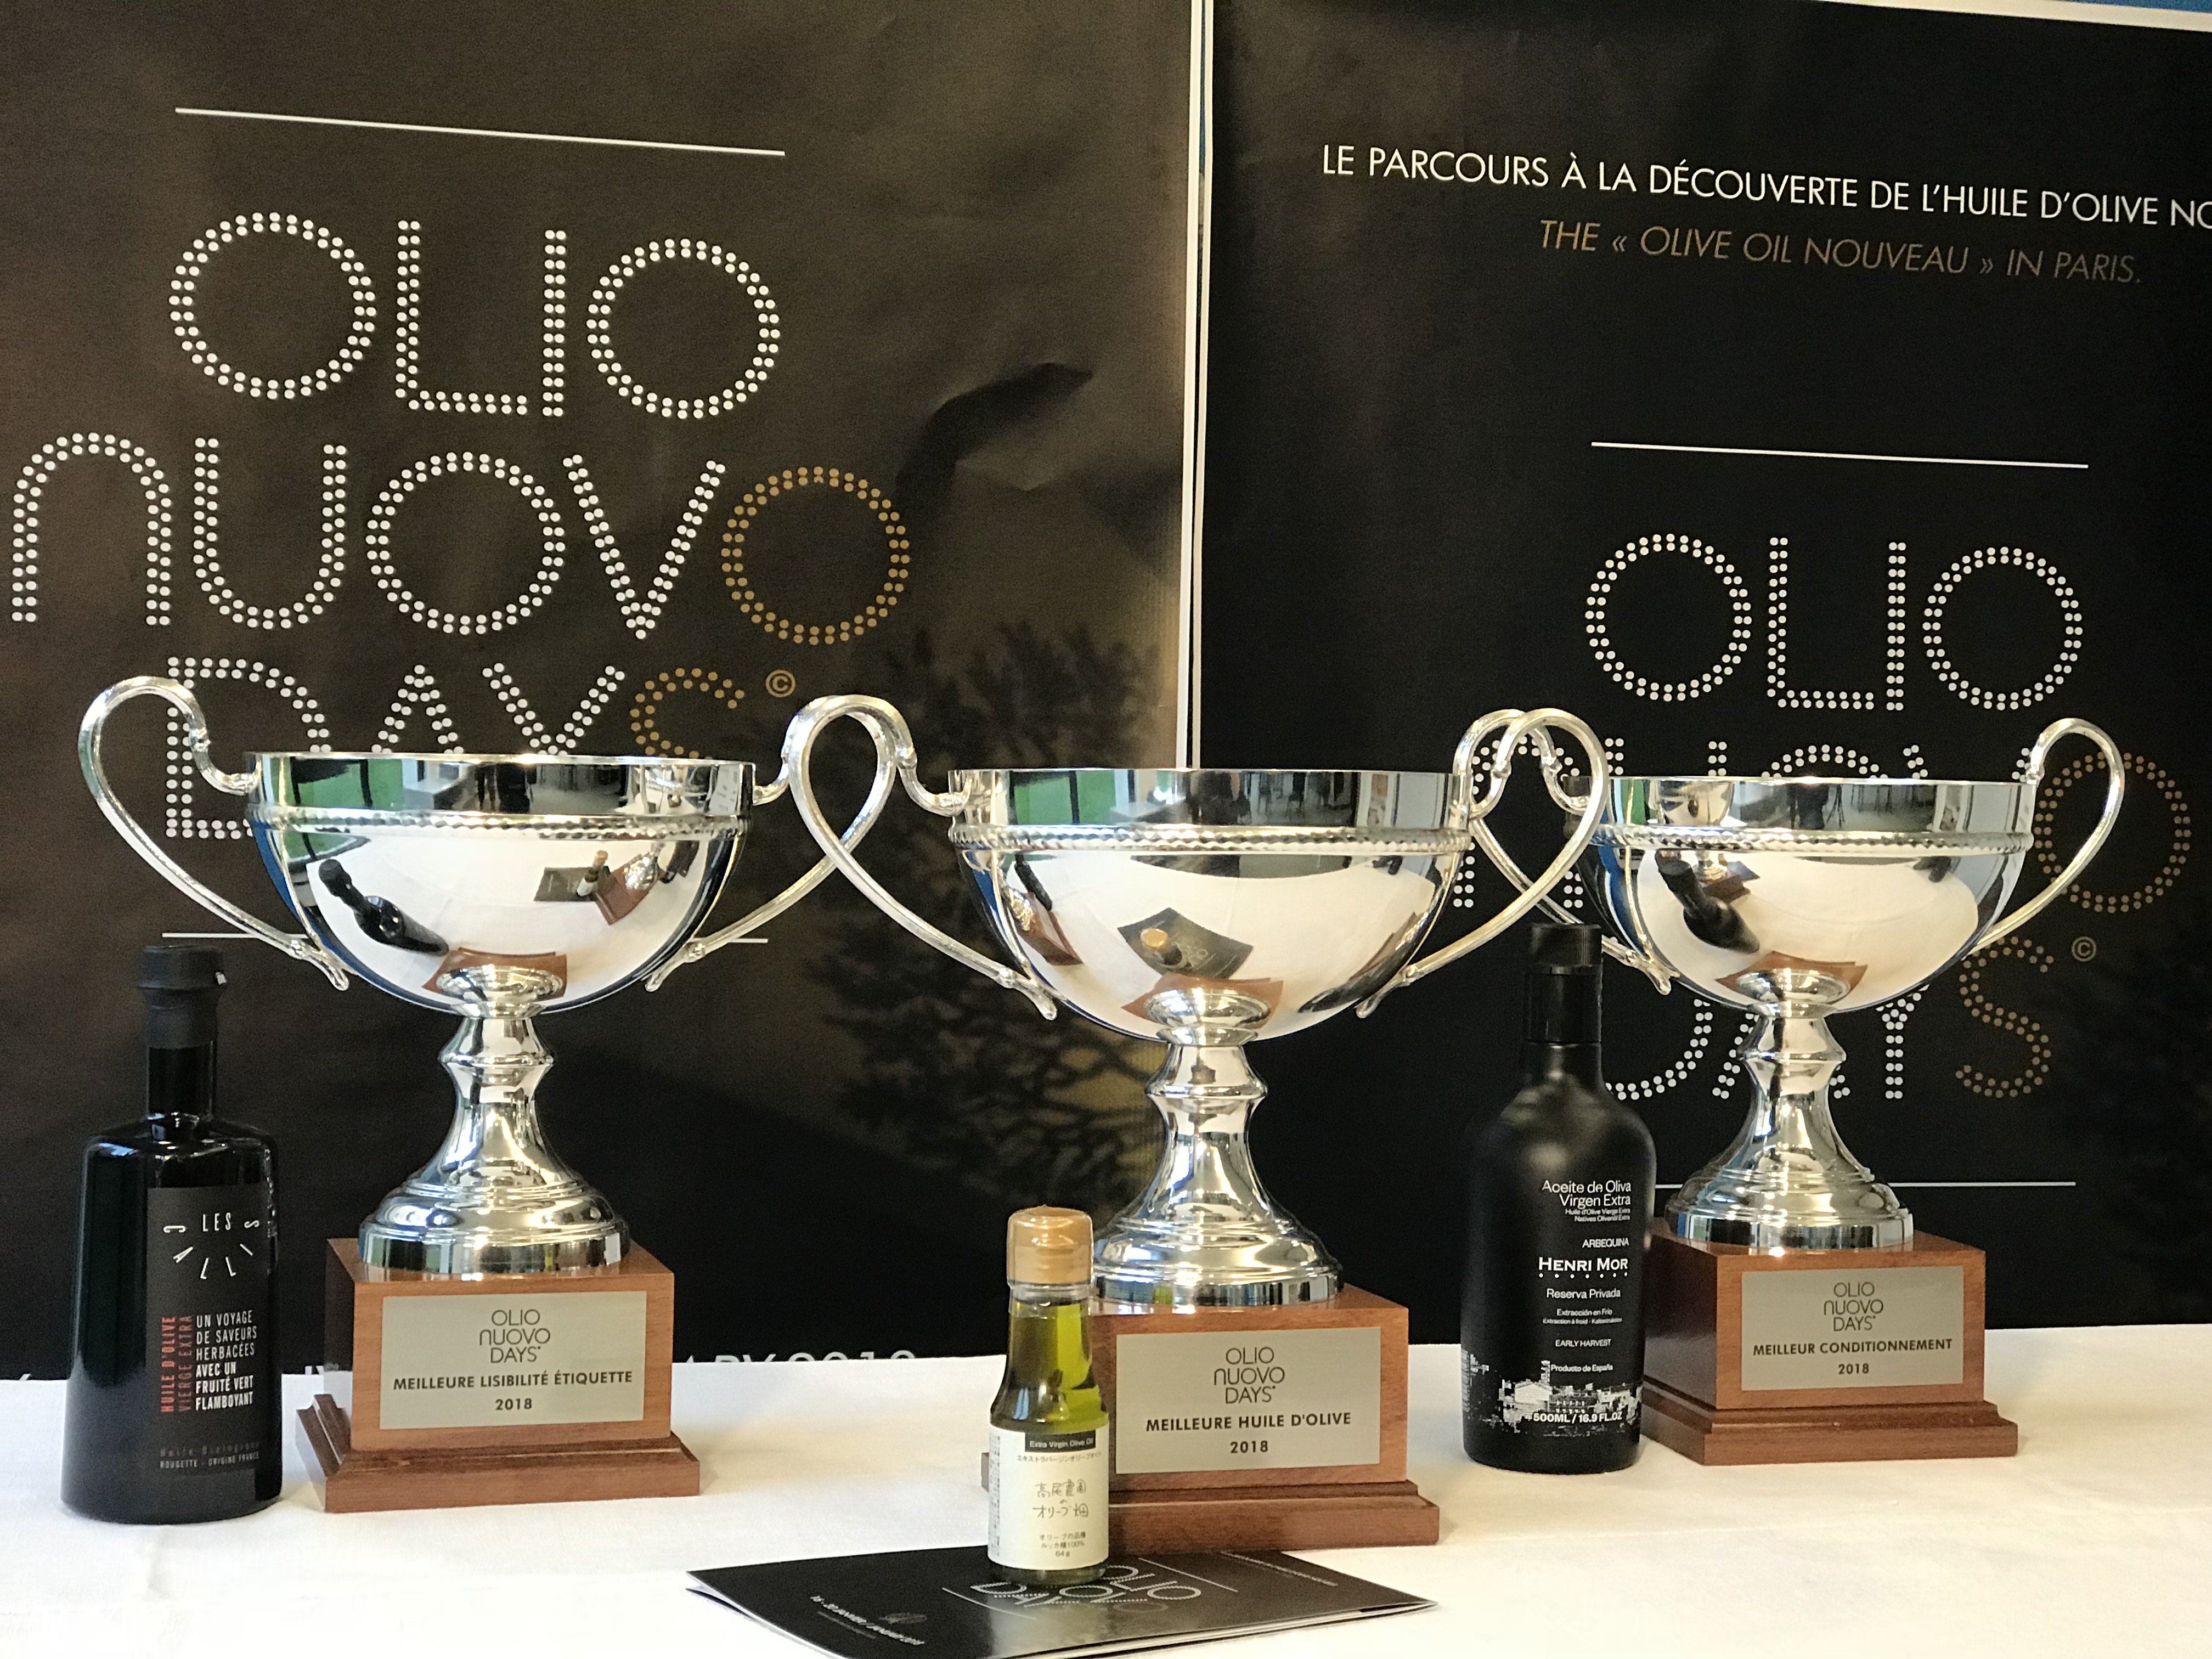 OLIO NUOVO DAYS FIRST COMPETITION